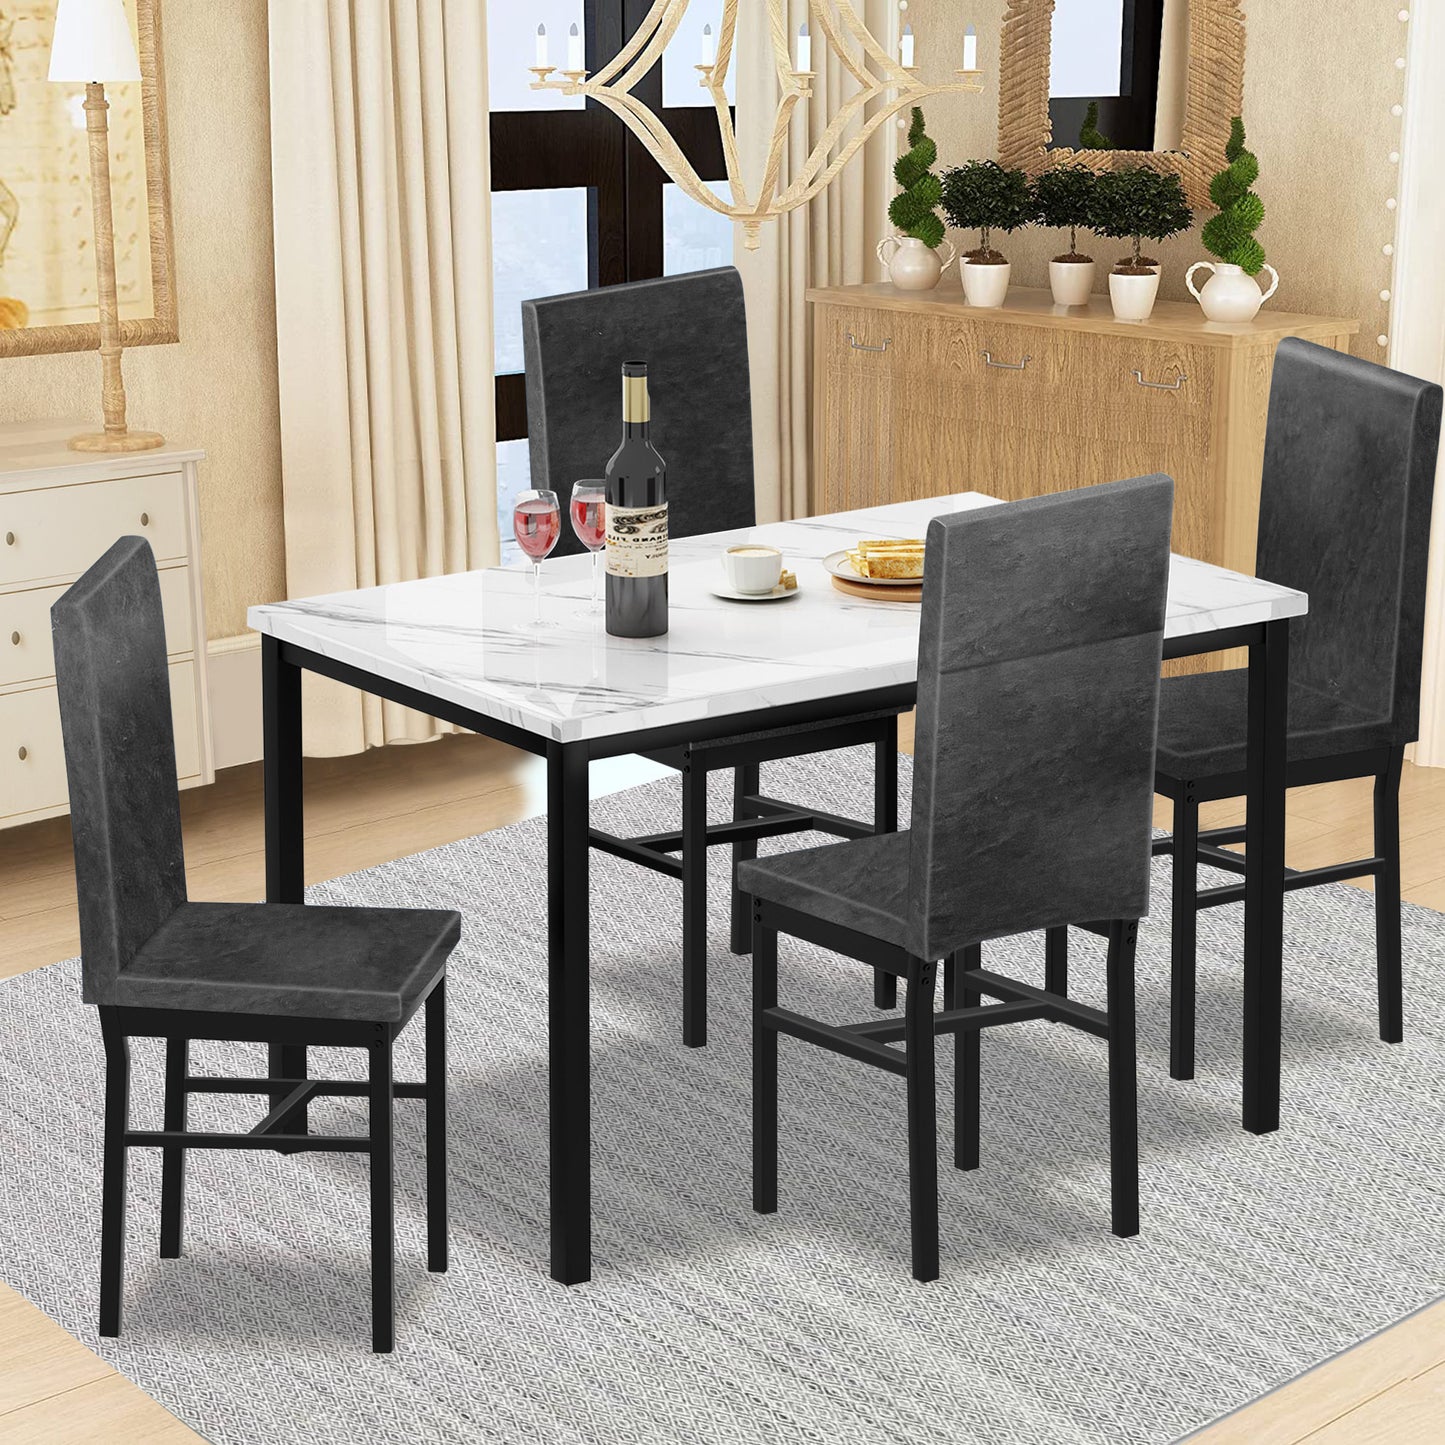 Modern Dining Table Set for 4, Faux Marble Table and PU Leather Upholstered Chairs Set, 5 Piece Kitchen Dining Set, Dining Table and Chairs Set for Small Space, Breakfast Nook, White, D8527